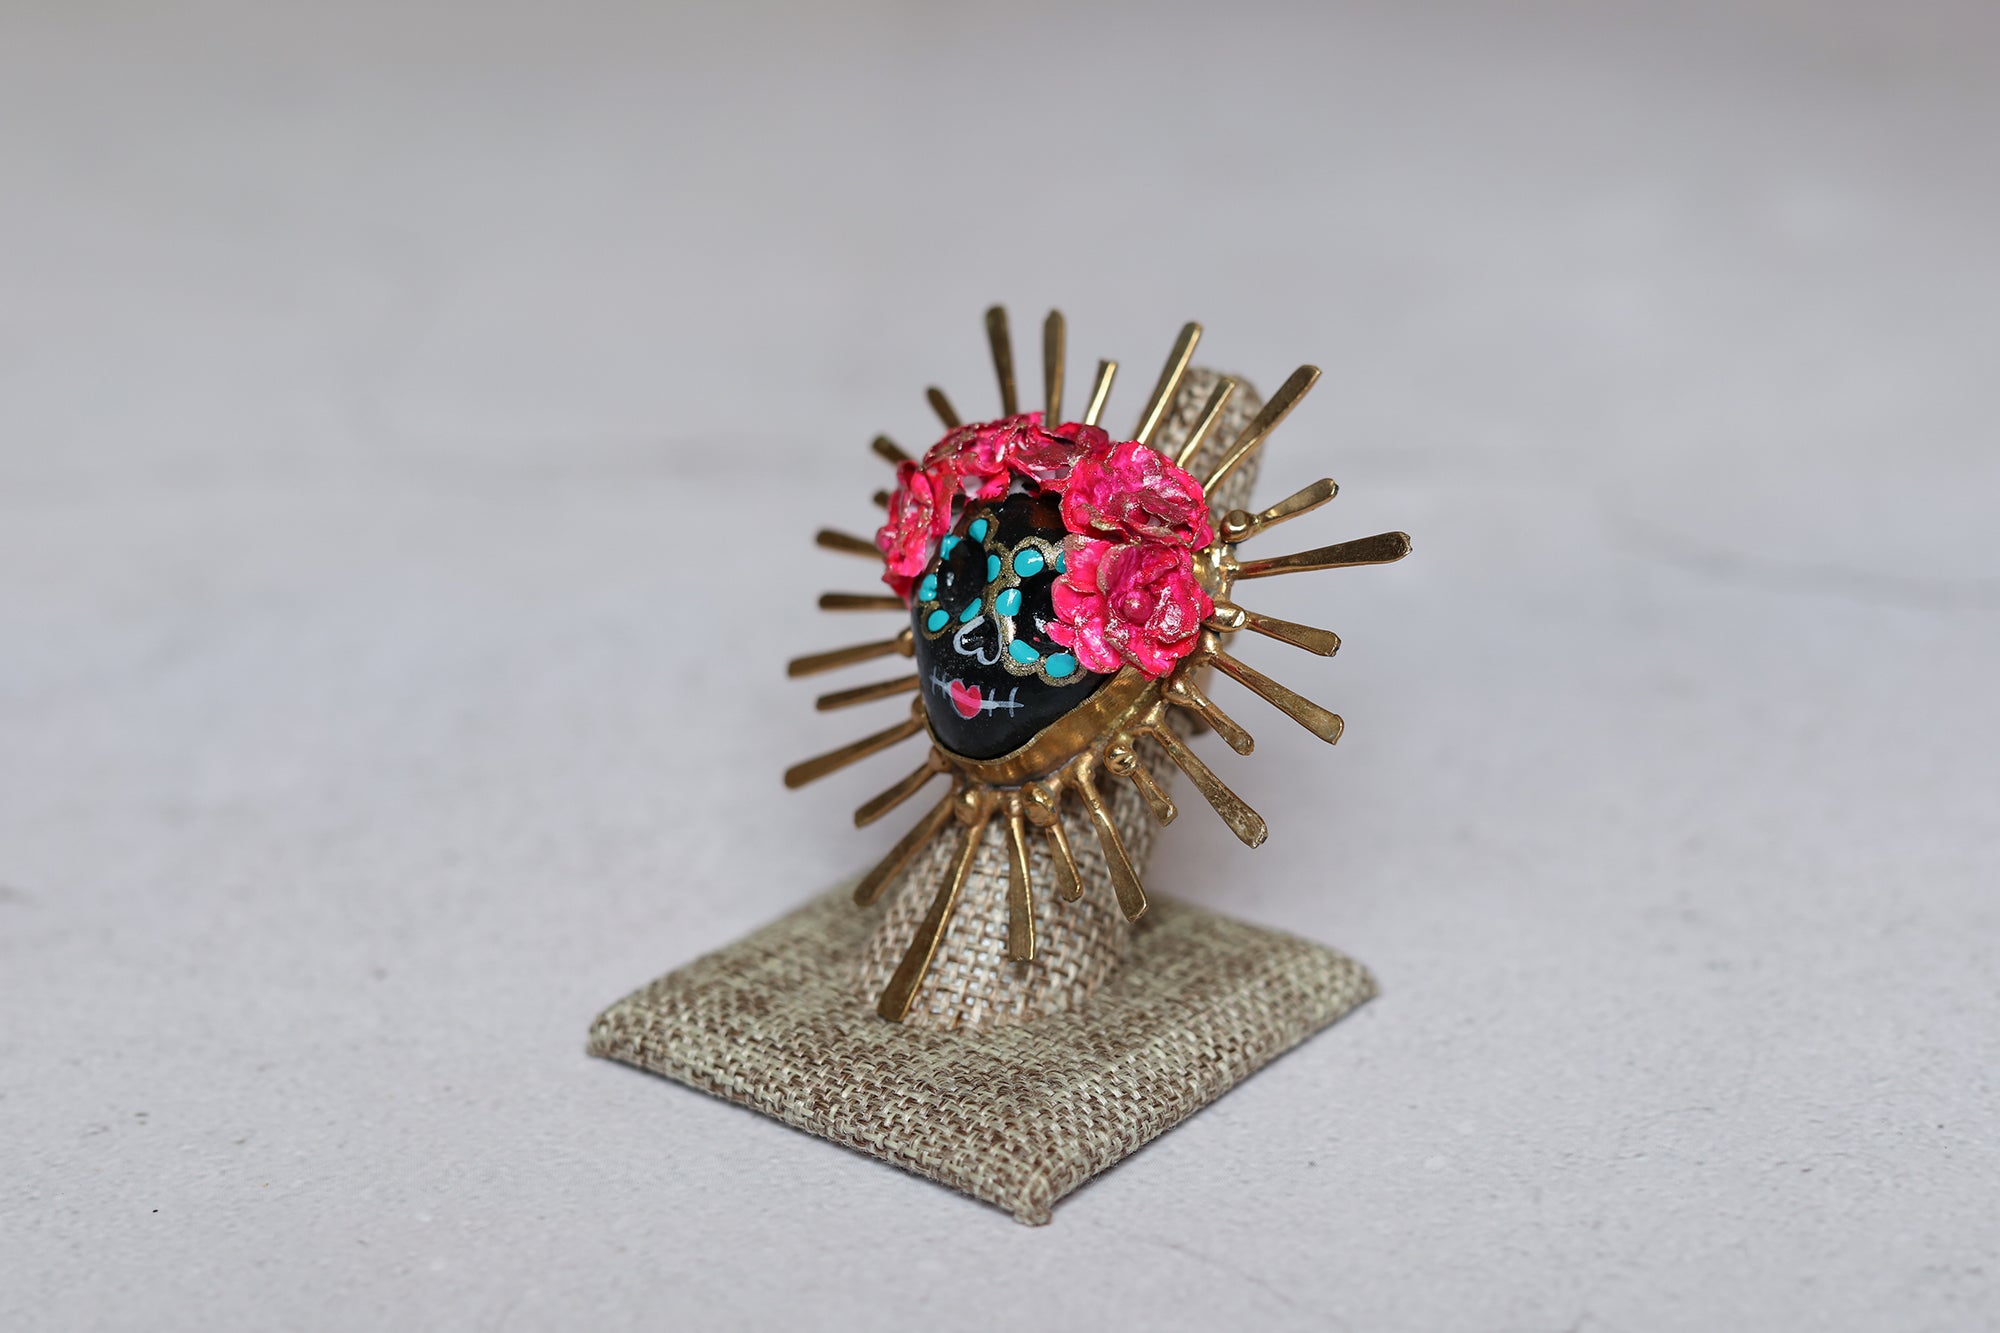 Black paper mache catrina ring with handmade pink roses and gold ornaments around it